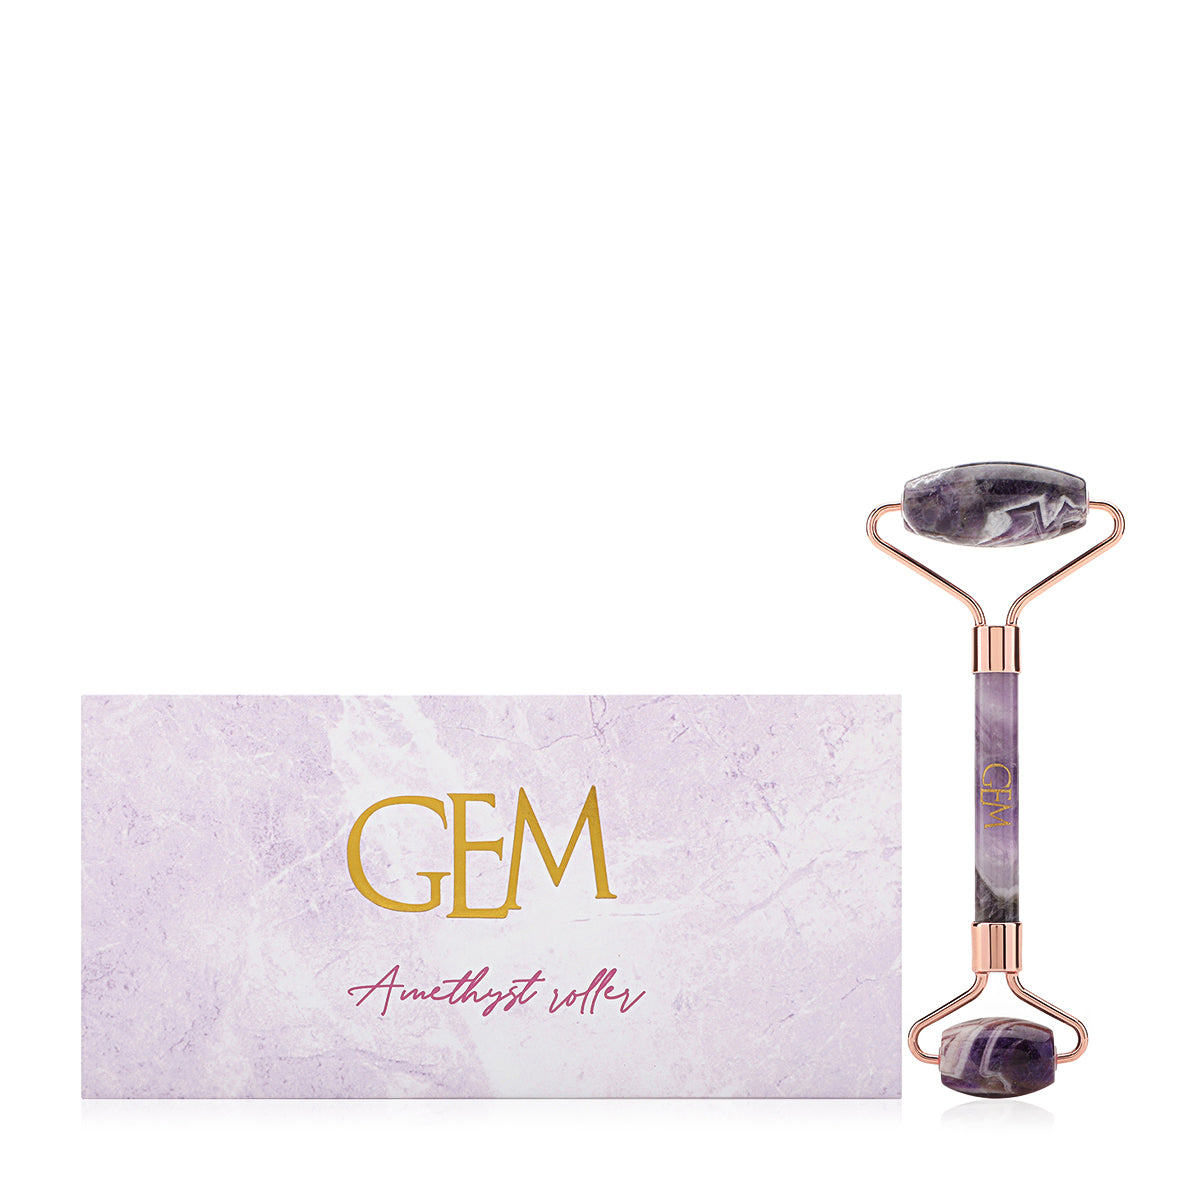 Double ended Amethyst Roller